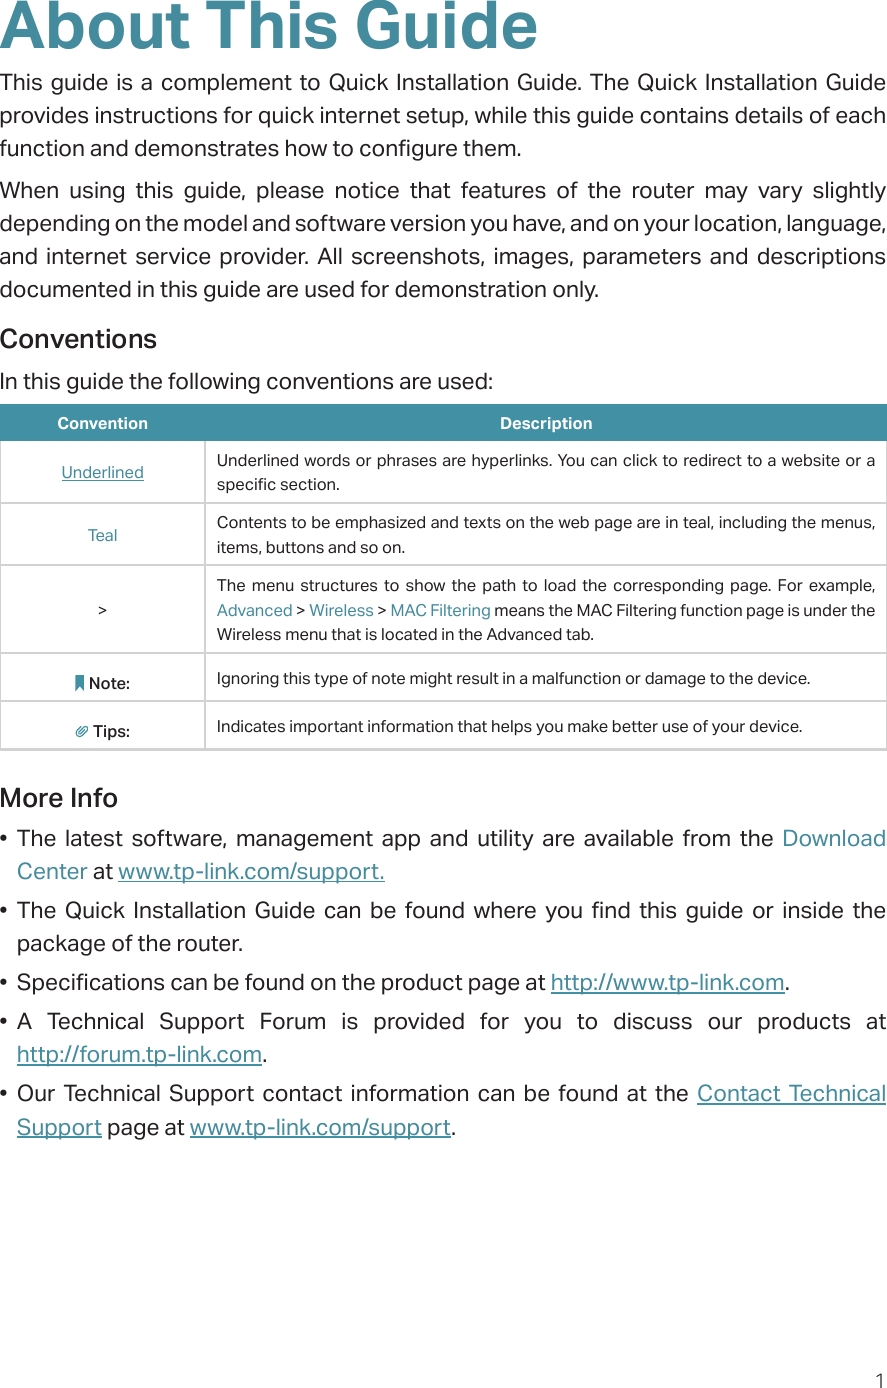 1About This GuideThis guide is a complement to Quick Installation Guide. The Quick Installation Guide provides instructions for quick internet setup, while this guide contains details of each function and demonstrates how to configure them. When using this guide, please notice that features of the router may vary slightly depending on the model and software version you have, and on your location, language, and internet service provider. All screenshots, images, parameters and descriptions documented in this guide are used for demonstration only.ConventionsIn this guide the following conventions are used:Convention DescriptionUnderlined Underlined words or phrases are hyperlinks. You can click to redirect to a website or a specific section.Teal Contents to be emphasized and texts on the web page are in teal, including the menus, items, buttons and so on.&gt;The menu structures to show the path to load the corresponding page. For example, Advanced &gt; Wireless &gt; MAC Filtering means the MAC Filtering function page is under the Wireless menu that is located in the Advanced tab.Note: Ignoring this type of note might result in a malfunction or damage to the device.Tips: Indicates important information that helps you make better use of your device.More Info• The latest software, management app and utility are available from the Download Center at www.tp-link.com/support.• The Quick Installation Guide can be found where you find this guide or inside the package of the router.•  Specifications can be found on the product page at http://www.tp-link.com.• A Technical Support Forum is provided for you to discuss our products at  http://forum.tp-link.com.• Our Technical Support contact information can be found at the Contact Technical Support page at www.tp-link.com/support.